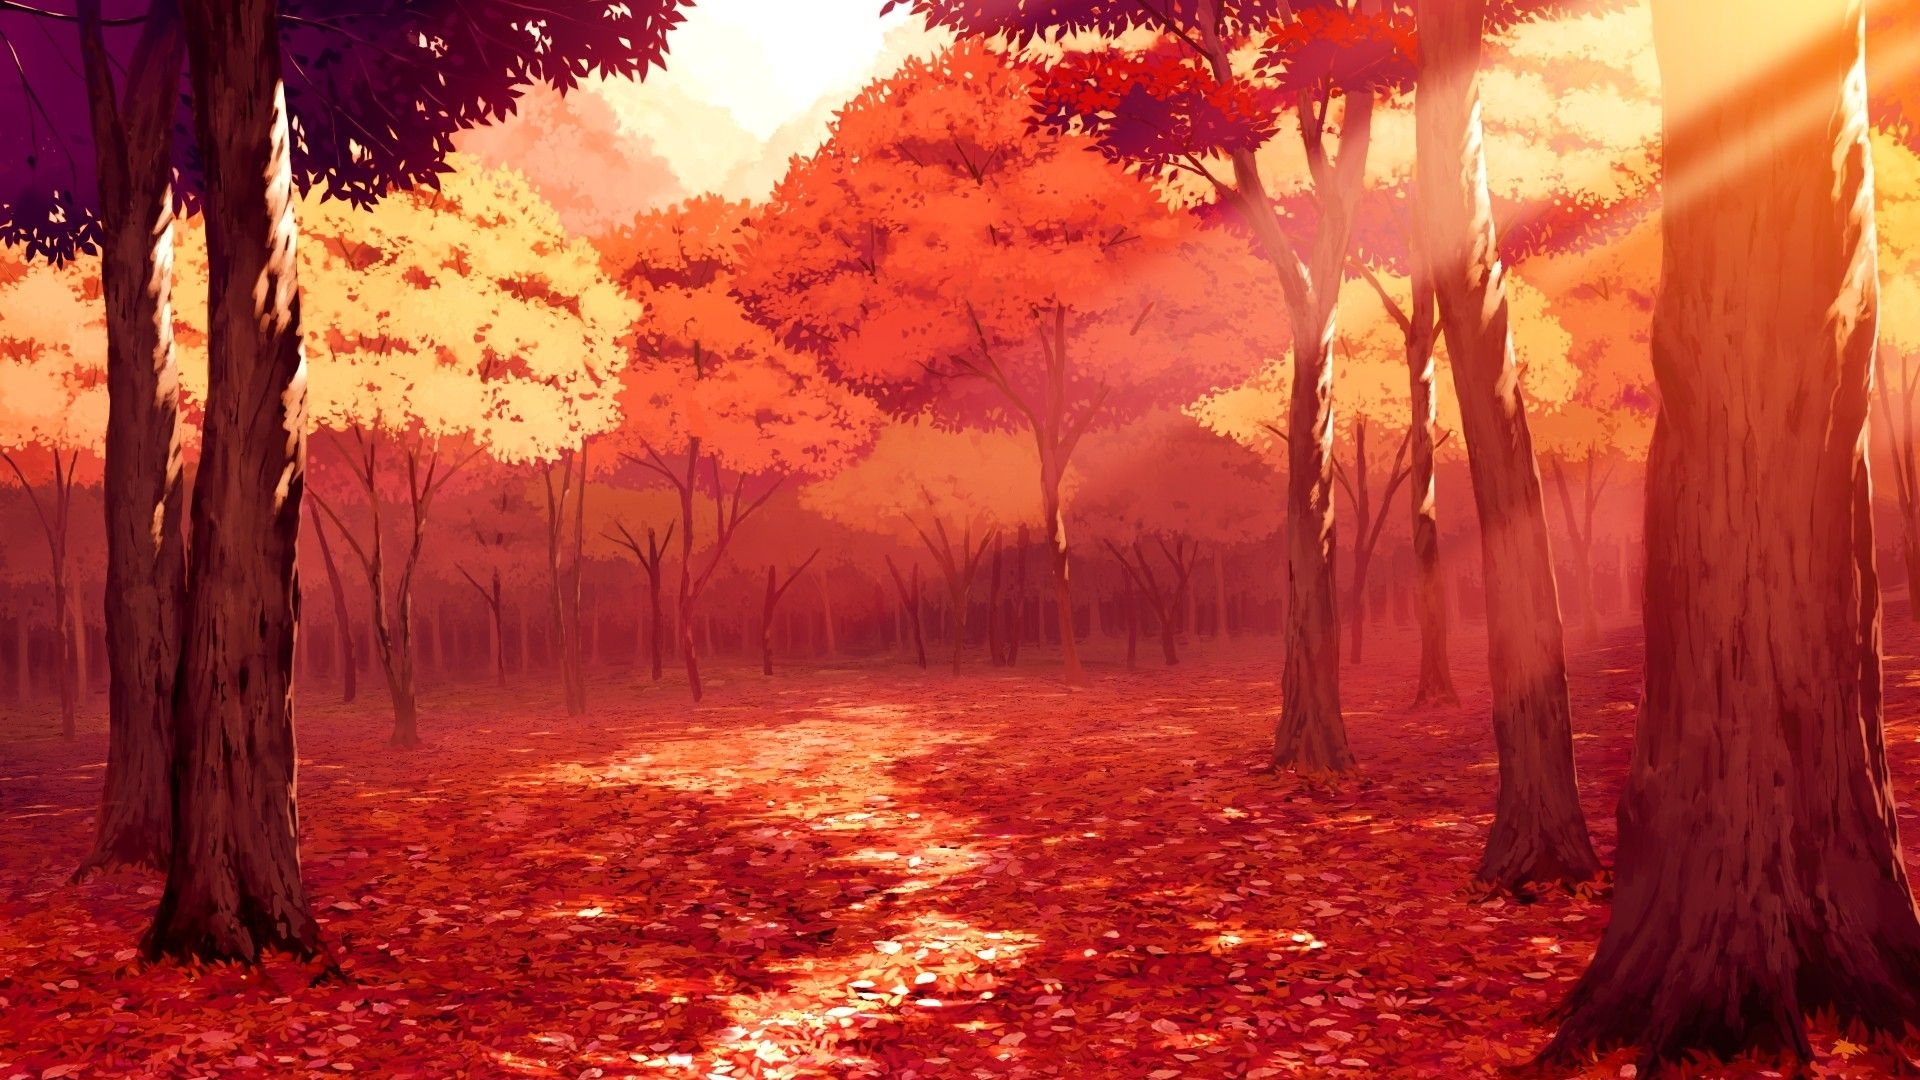 Anime Forest Download Free Wallpaper Image Search